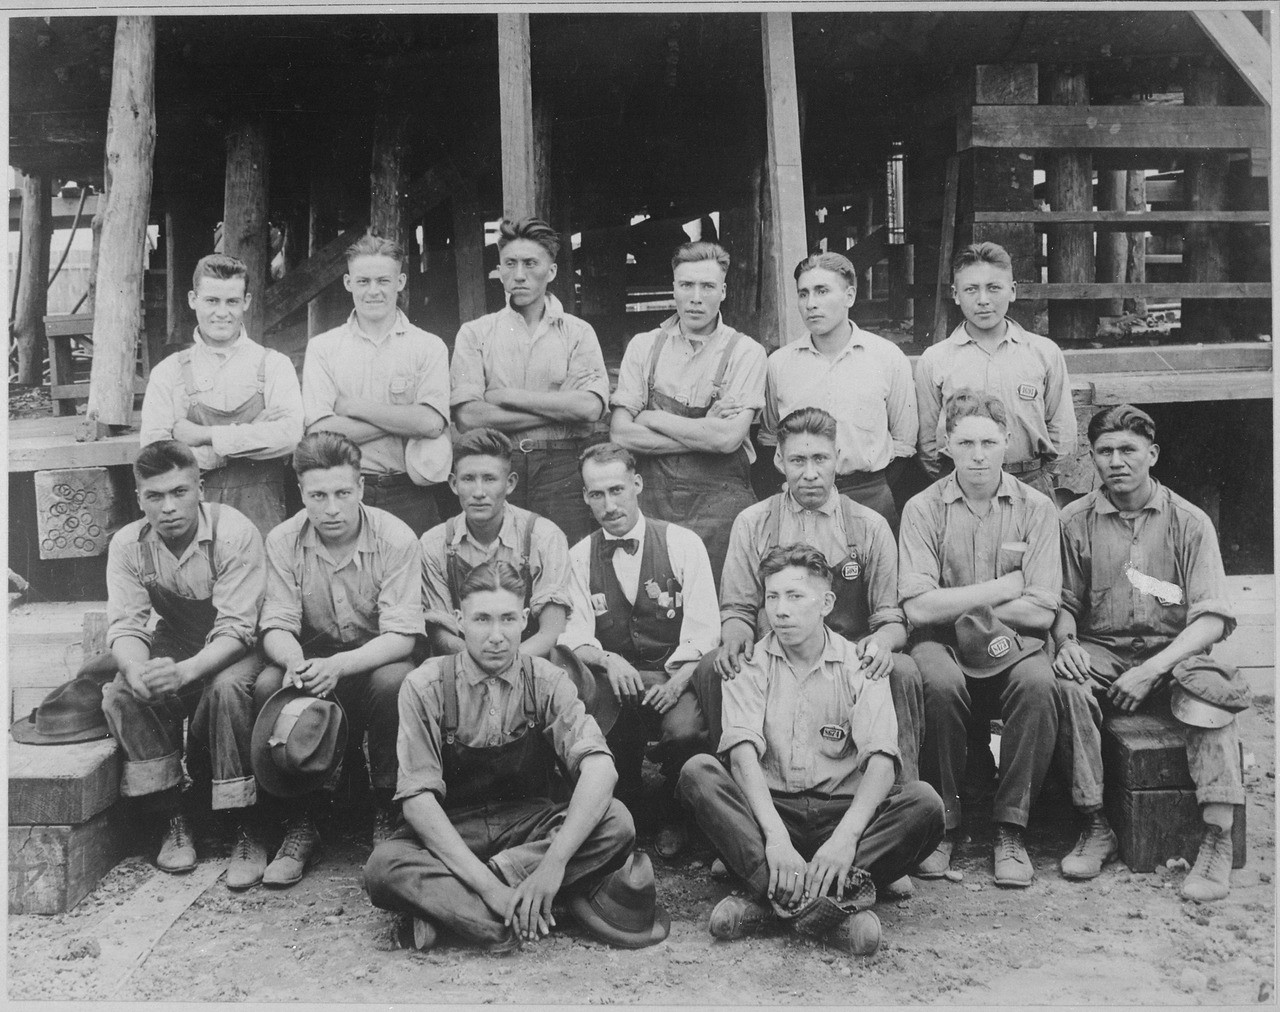 Twenty-five young men in three rows, first row is seated, in an industrial yard